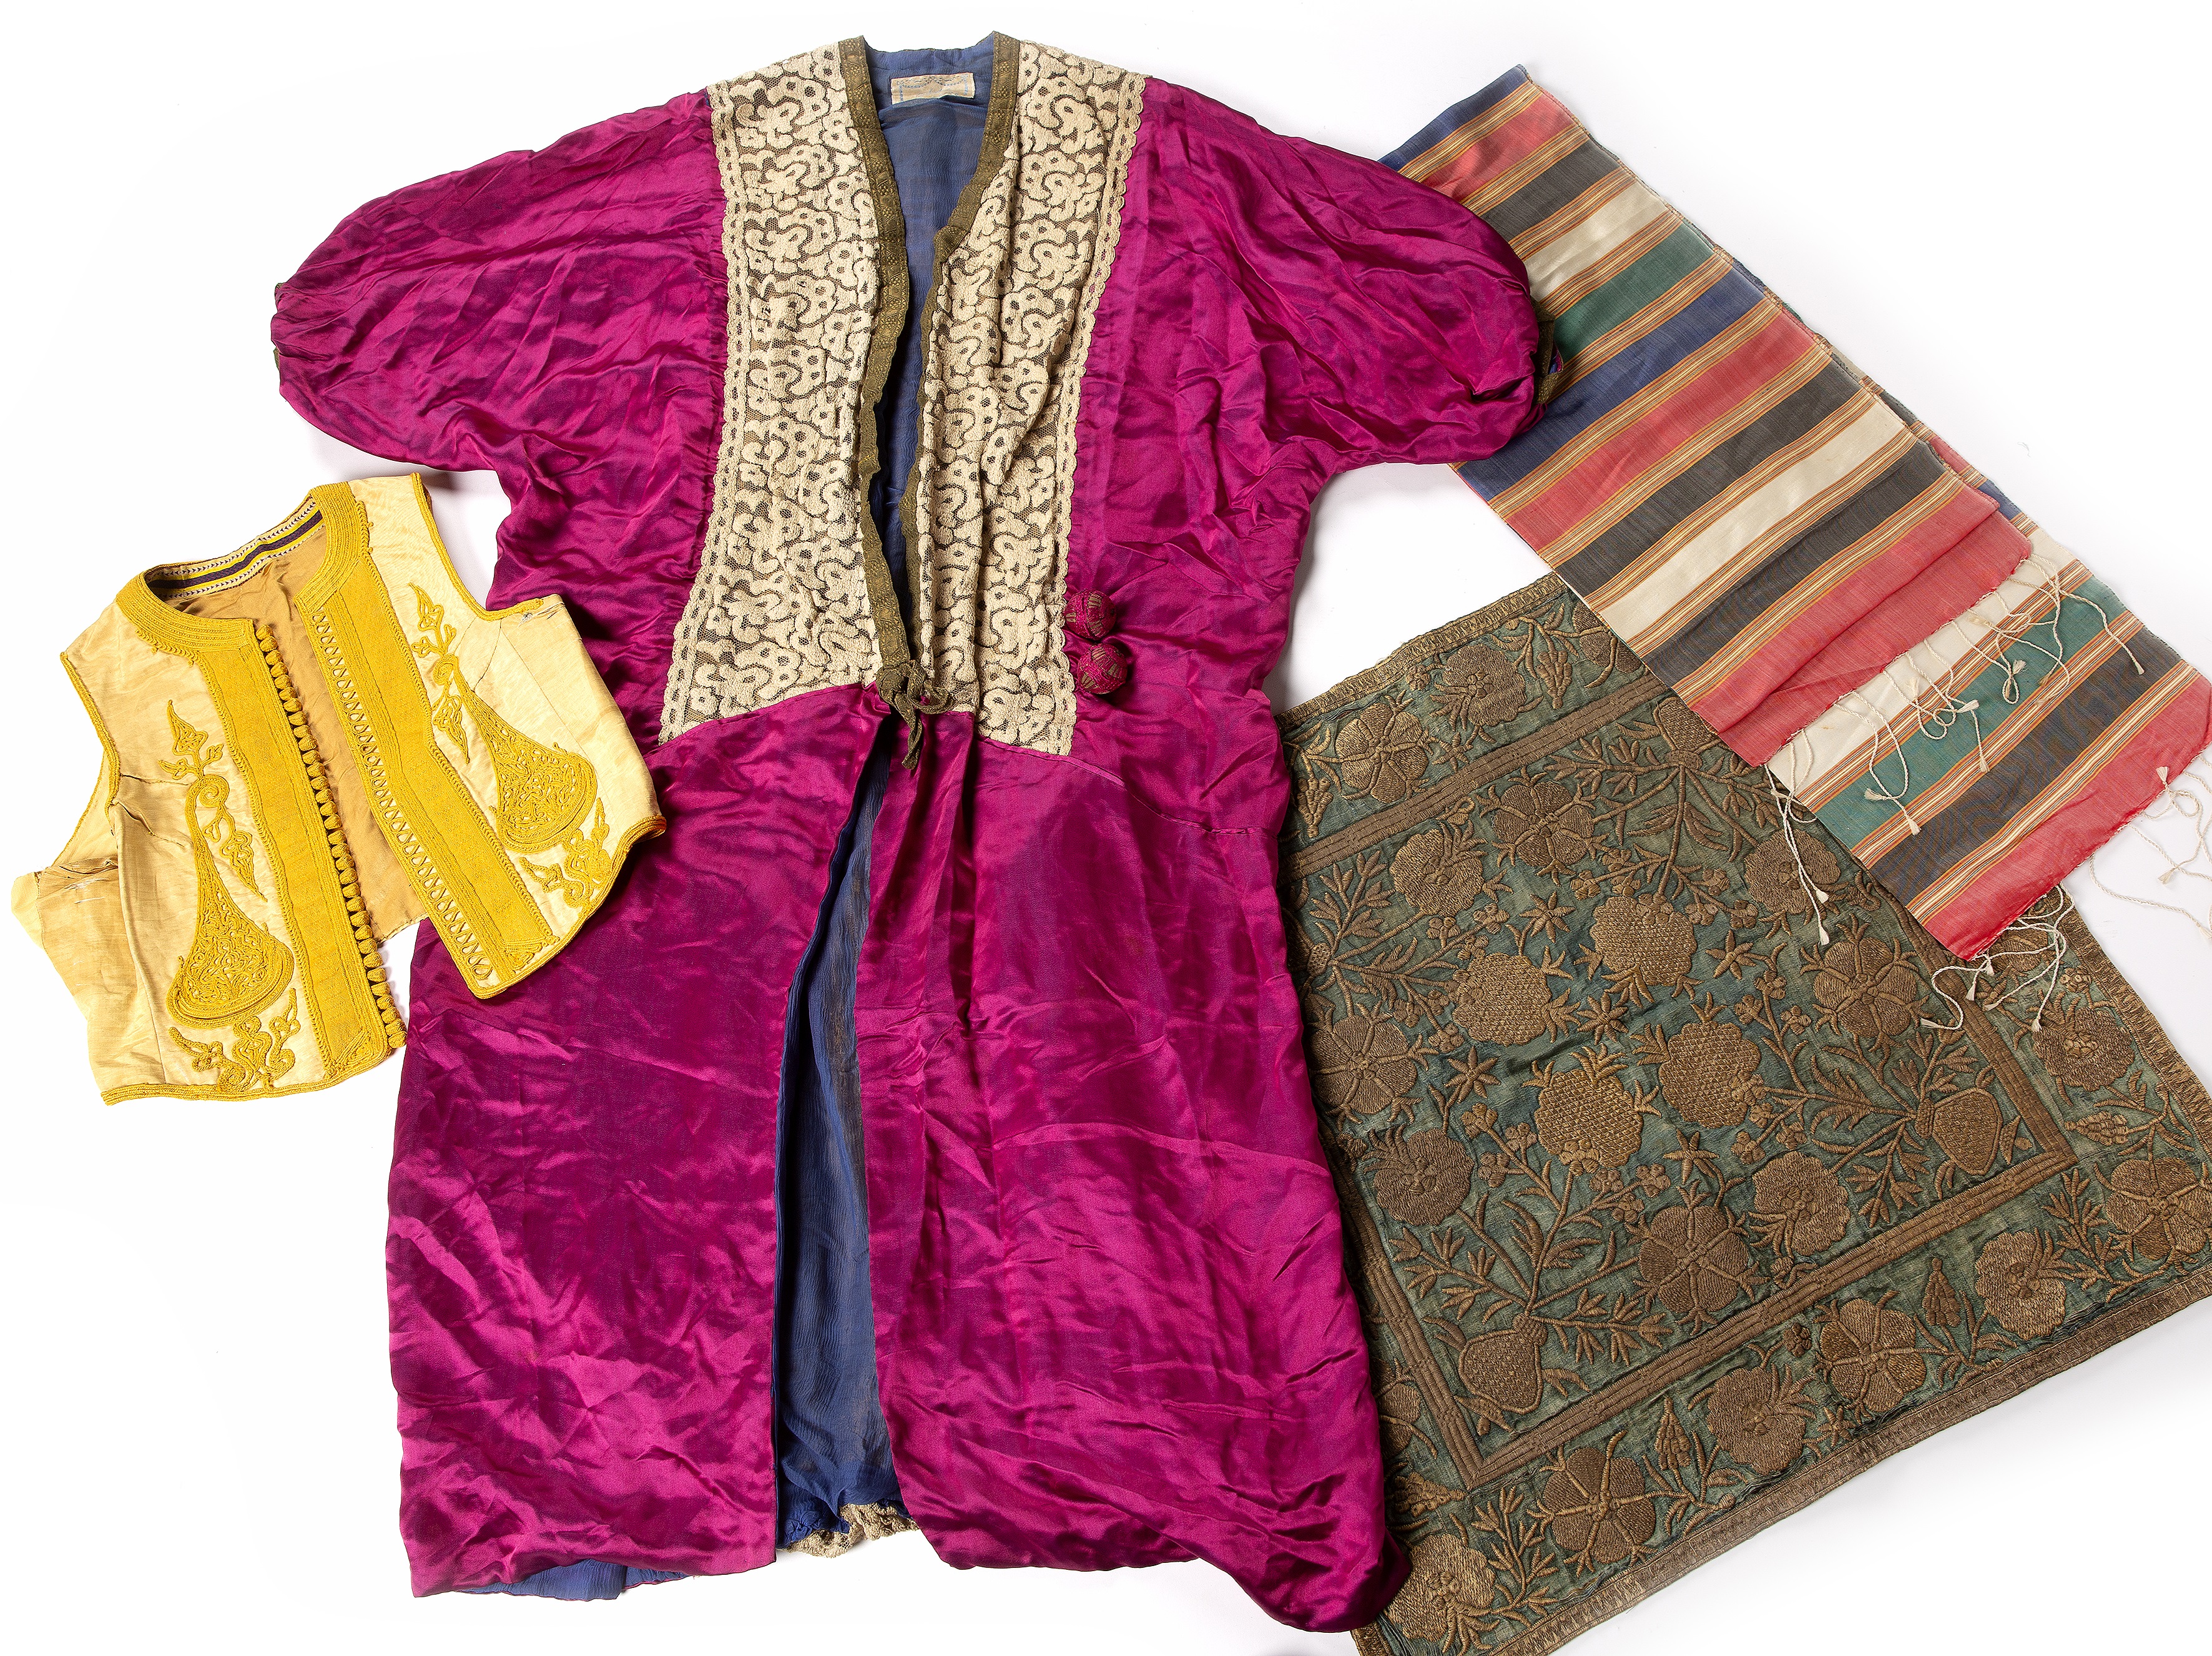 Small group of Ottoman textiles Turkish including an embroidered panel, waistcoat and other